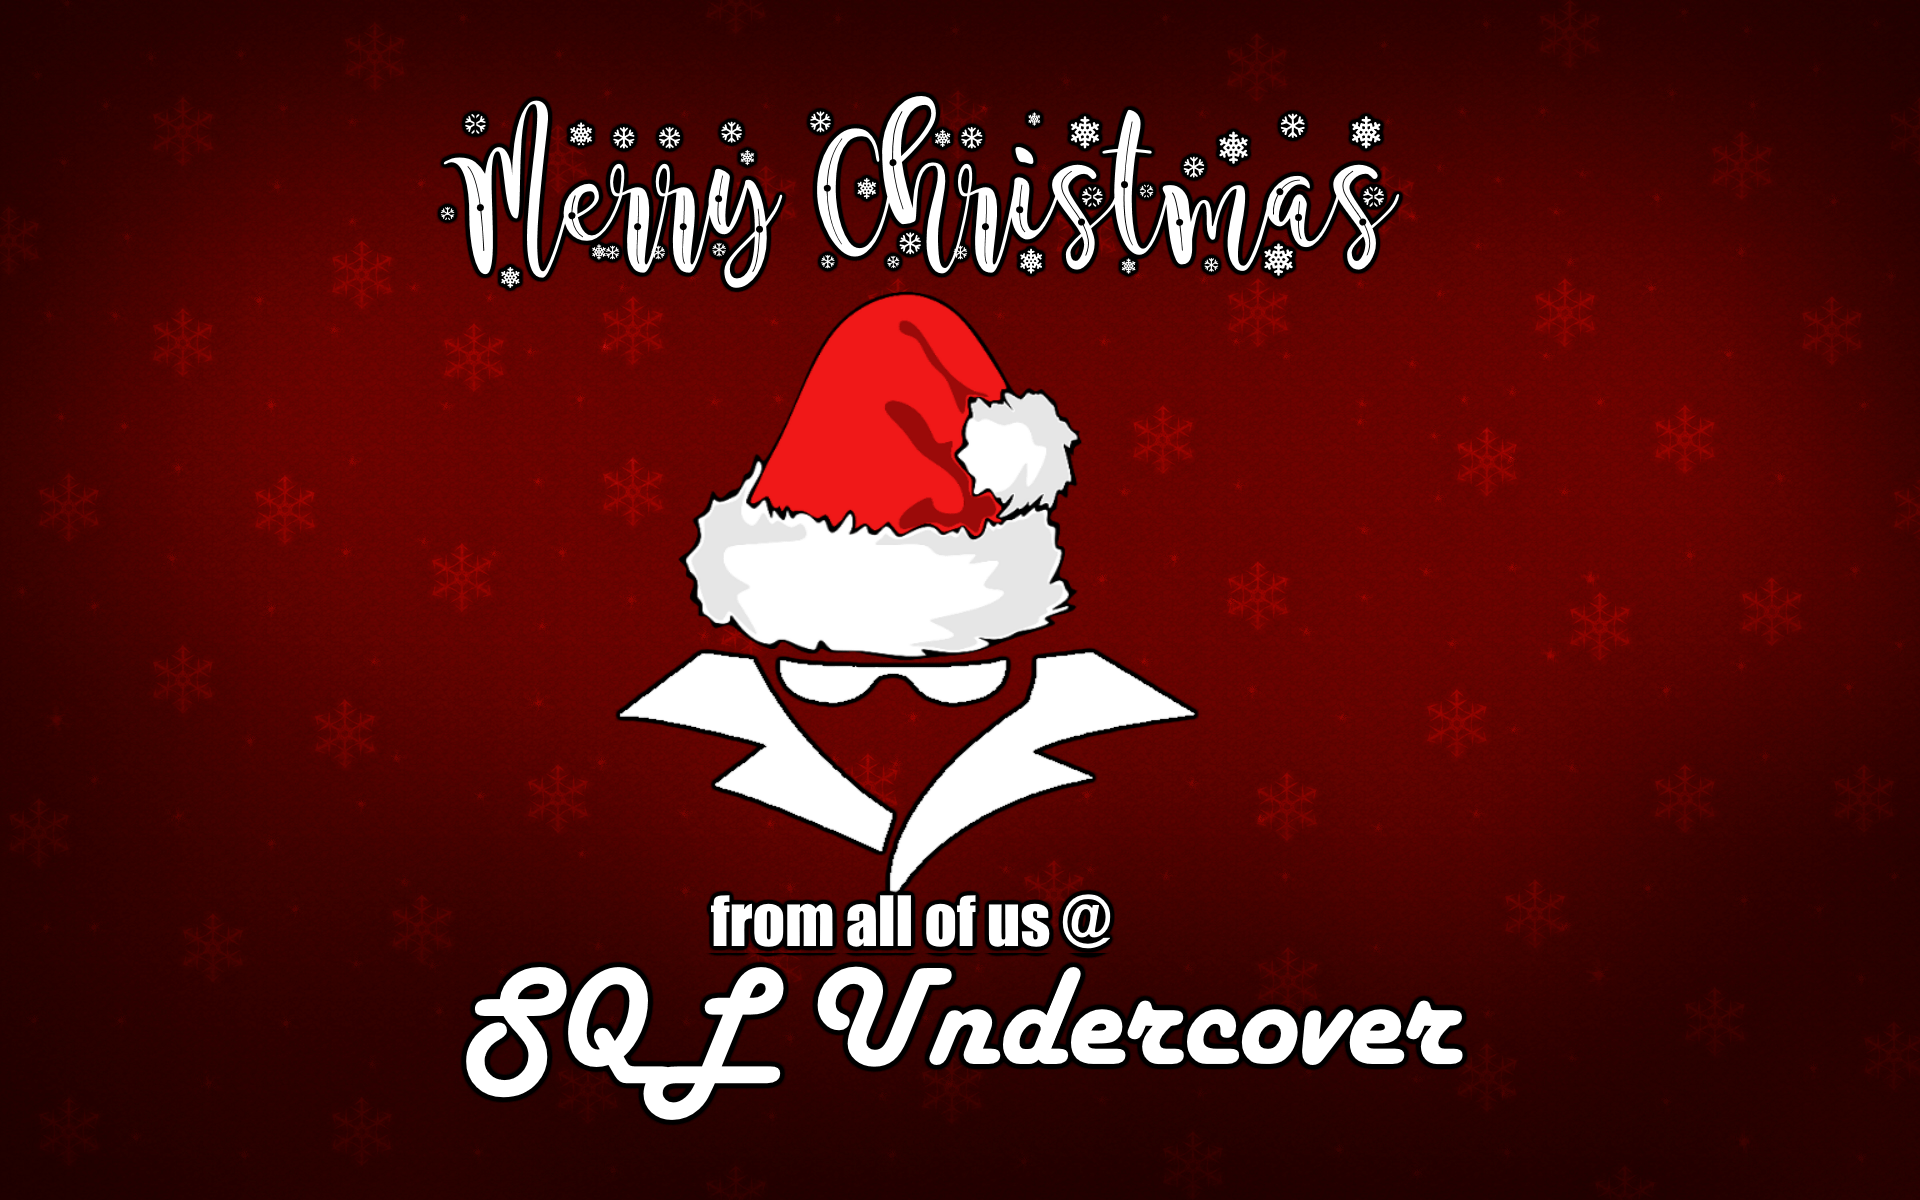 Merry Christmas image SQL Undercover